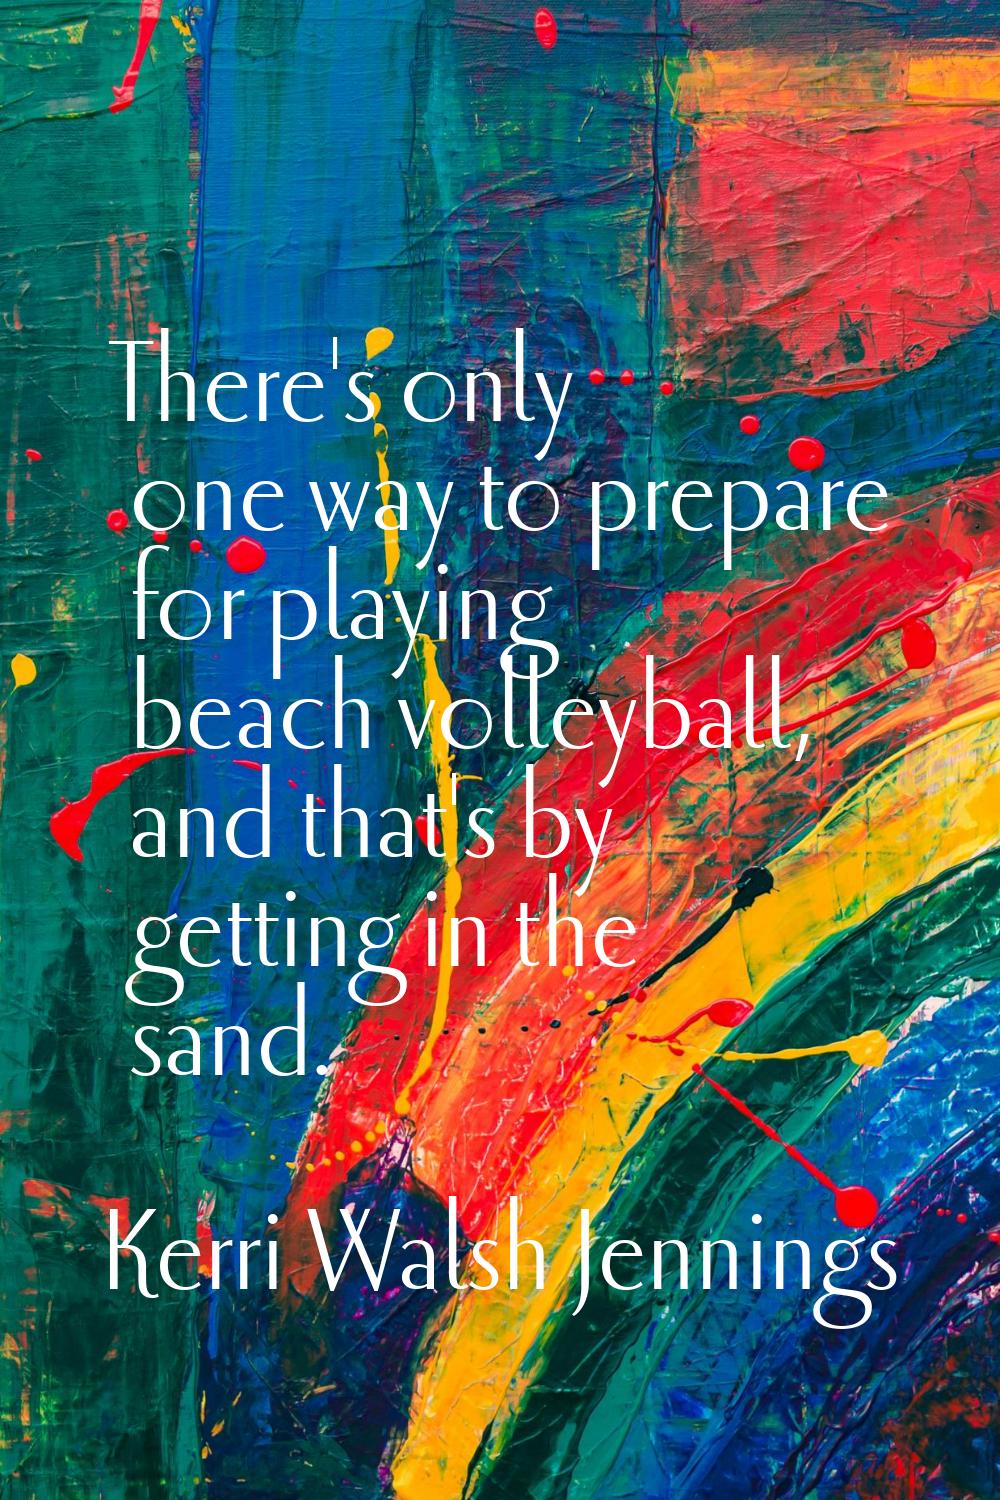 There's only one way to prepare for playing beach volleyball, and that's by getting in the sand.